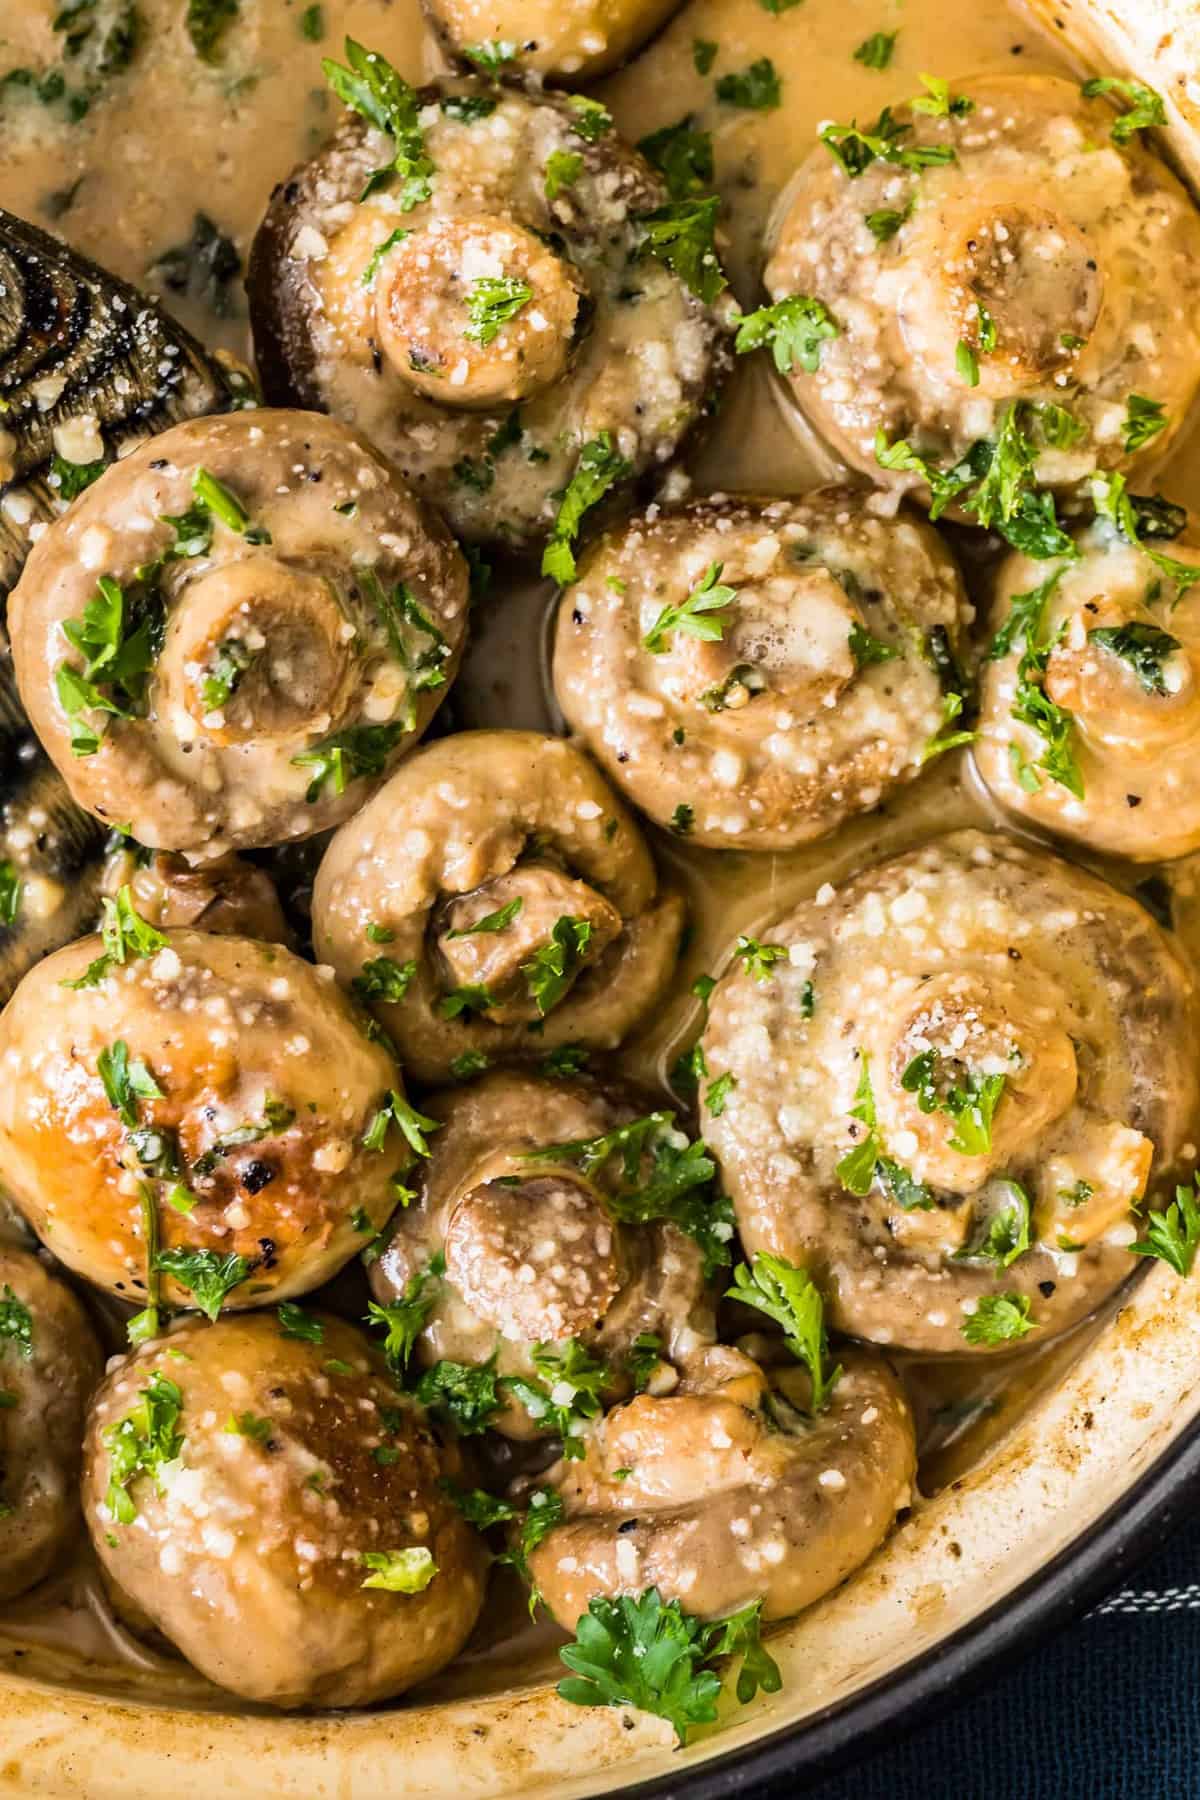 Cooked mushrooms in a pan